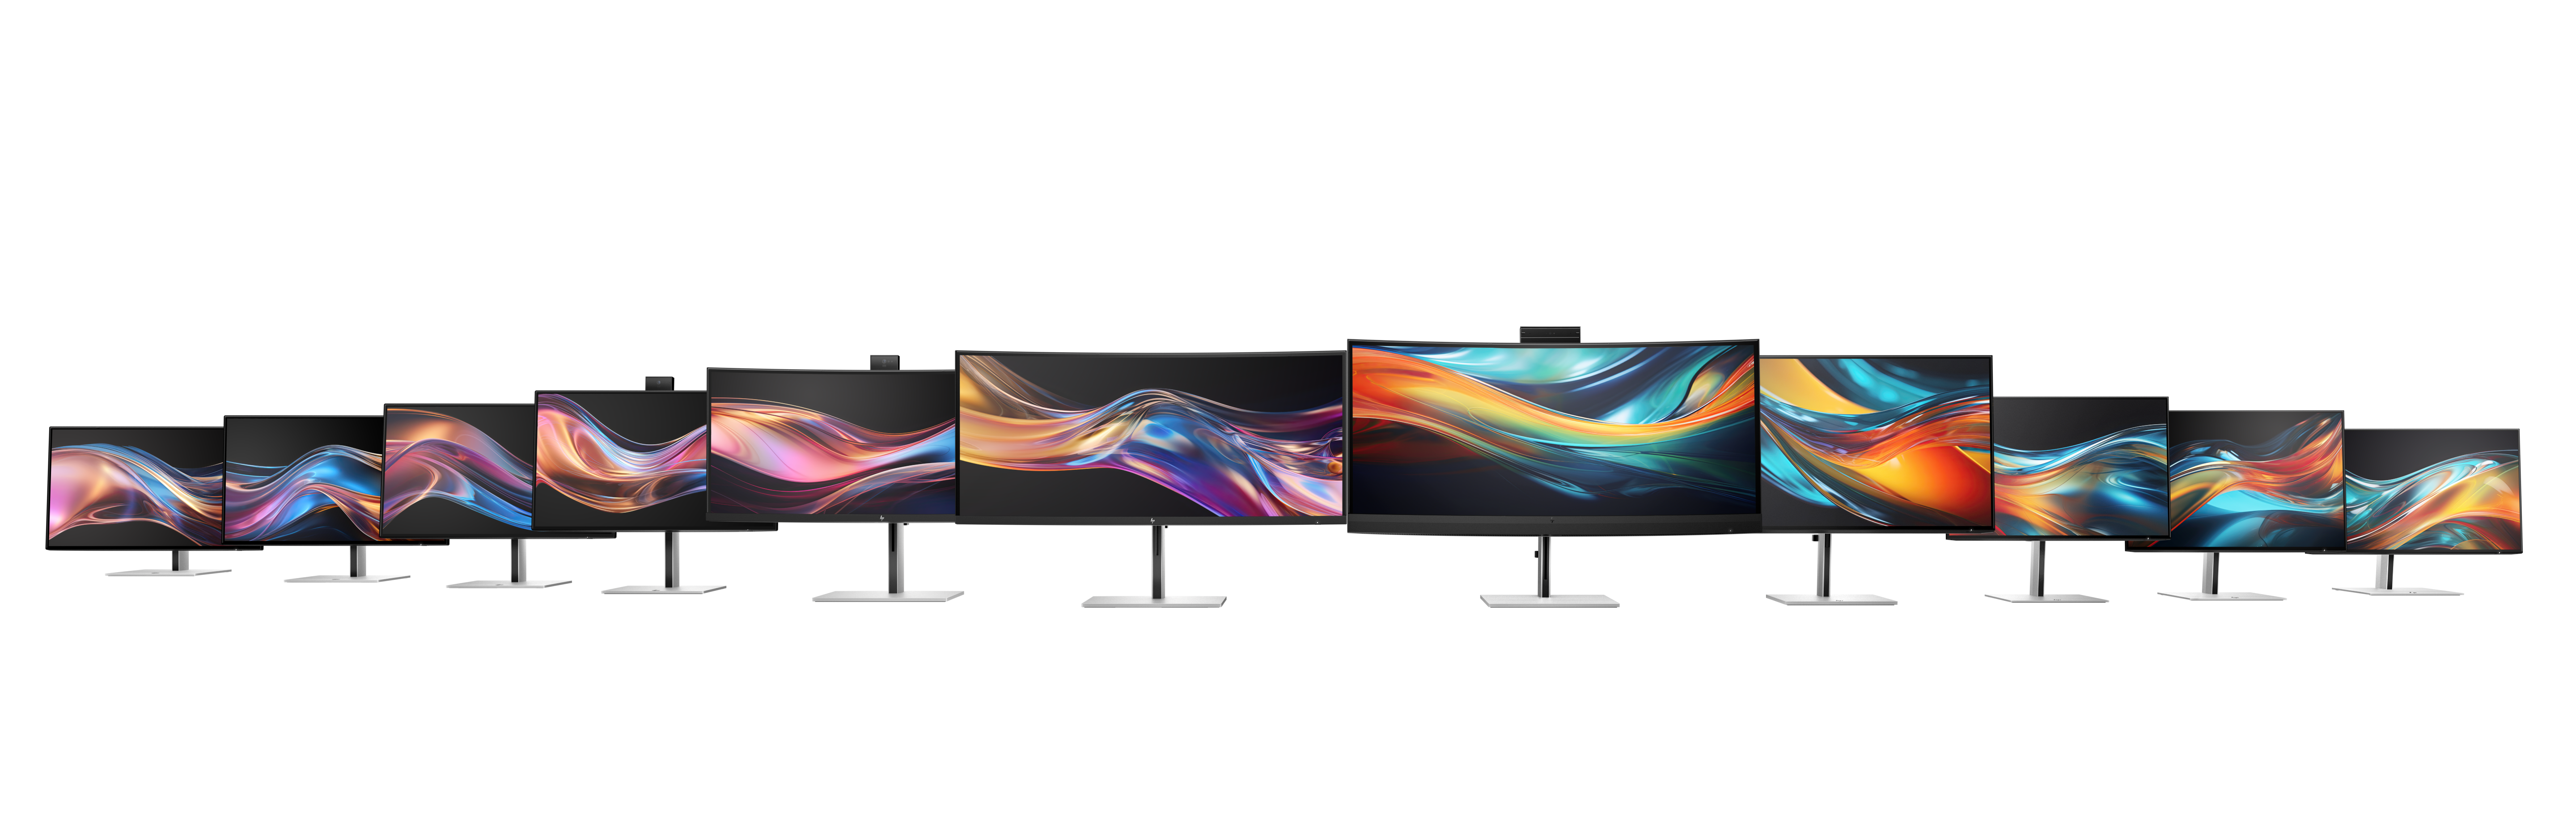 HP%20Series%207%20Pro%20Displays_Family.png